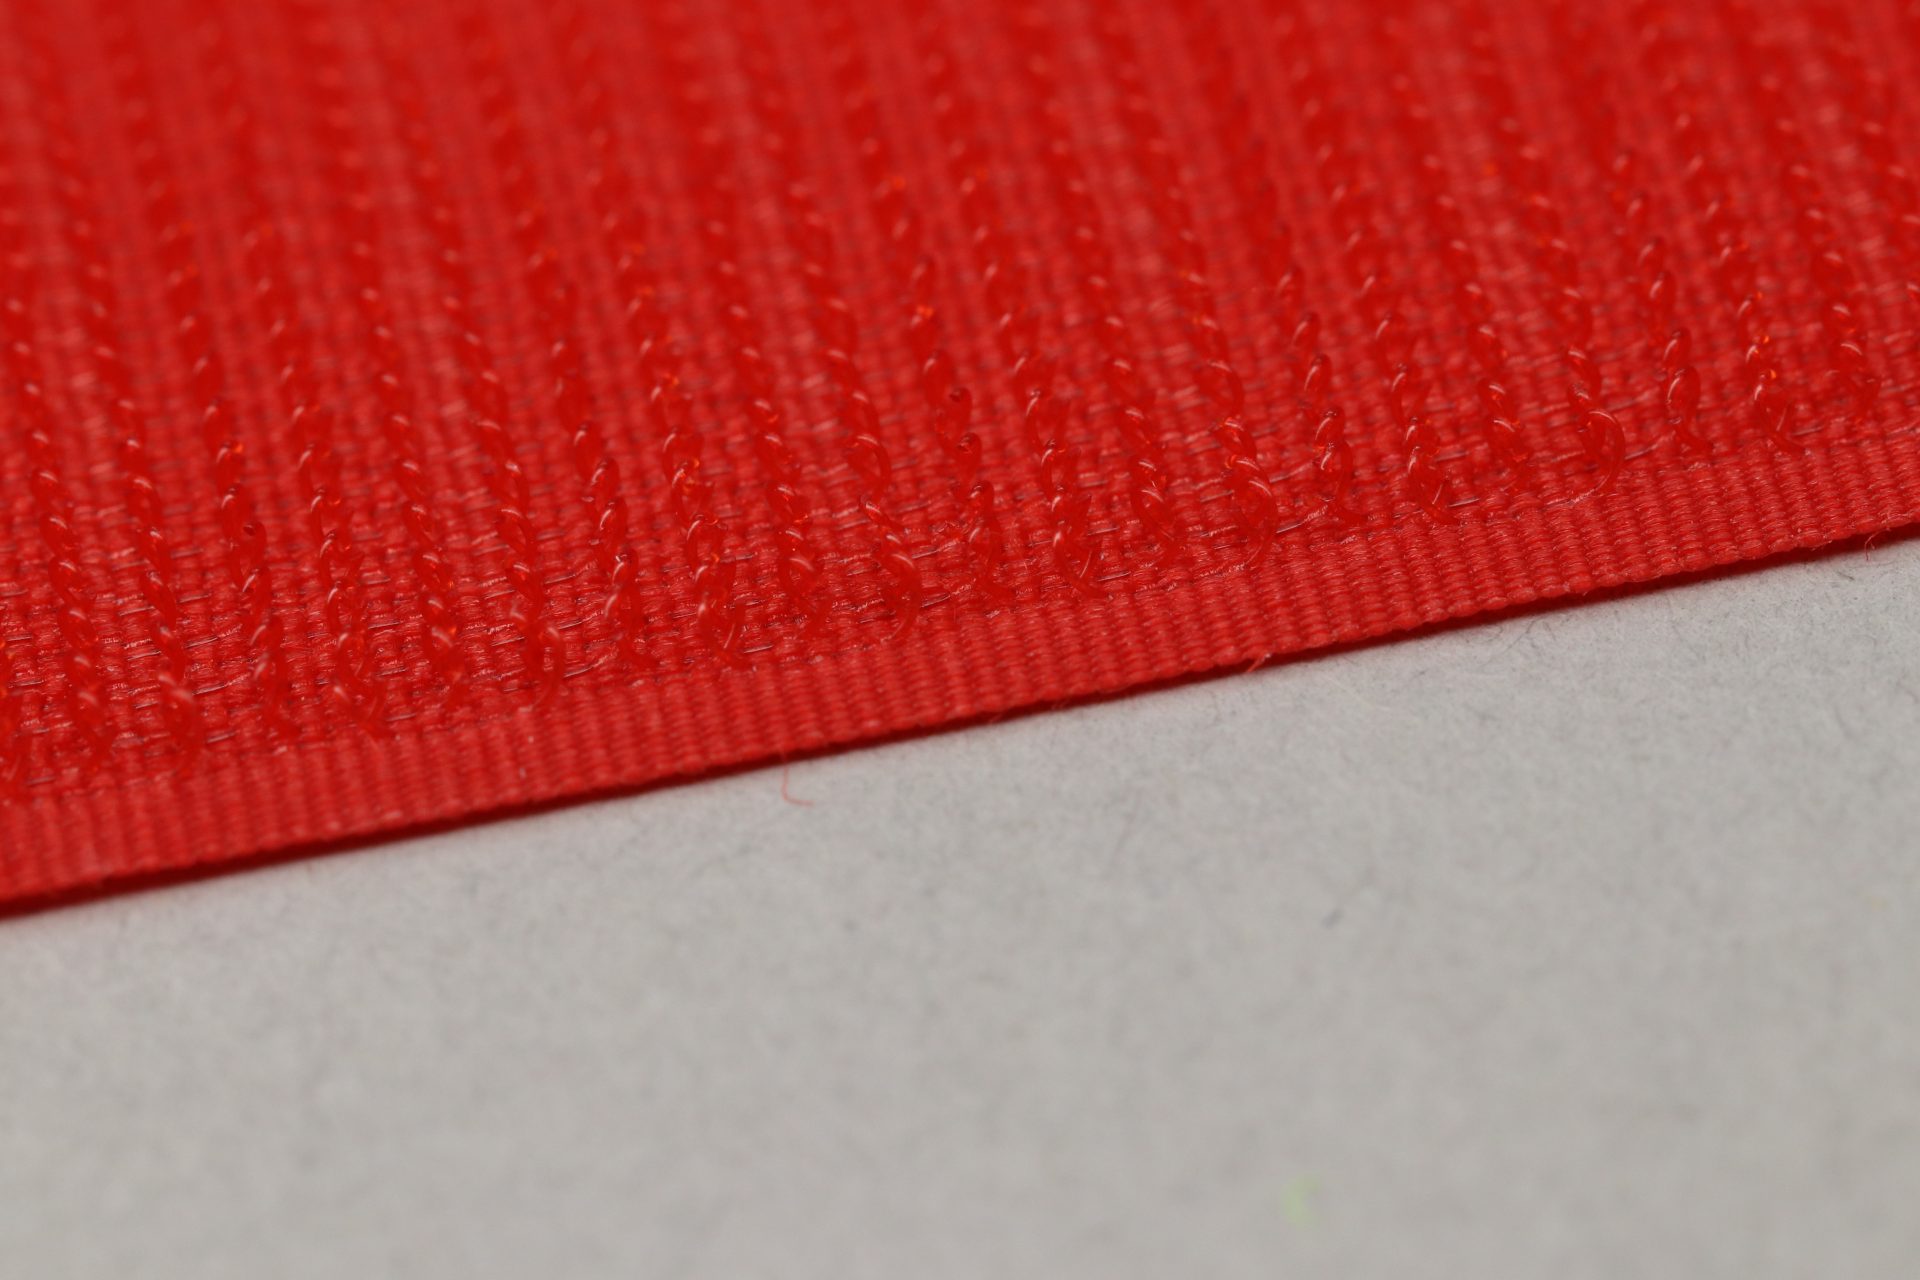 VELCRO® Brand Sew-on 20mm tape RED HOOK 25mtr roll